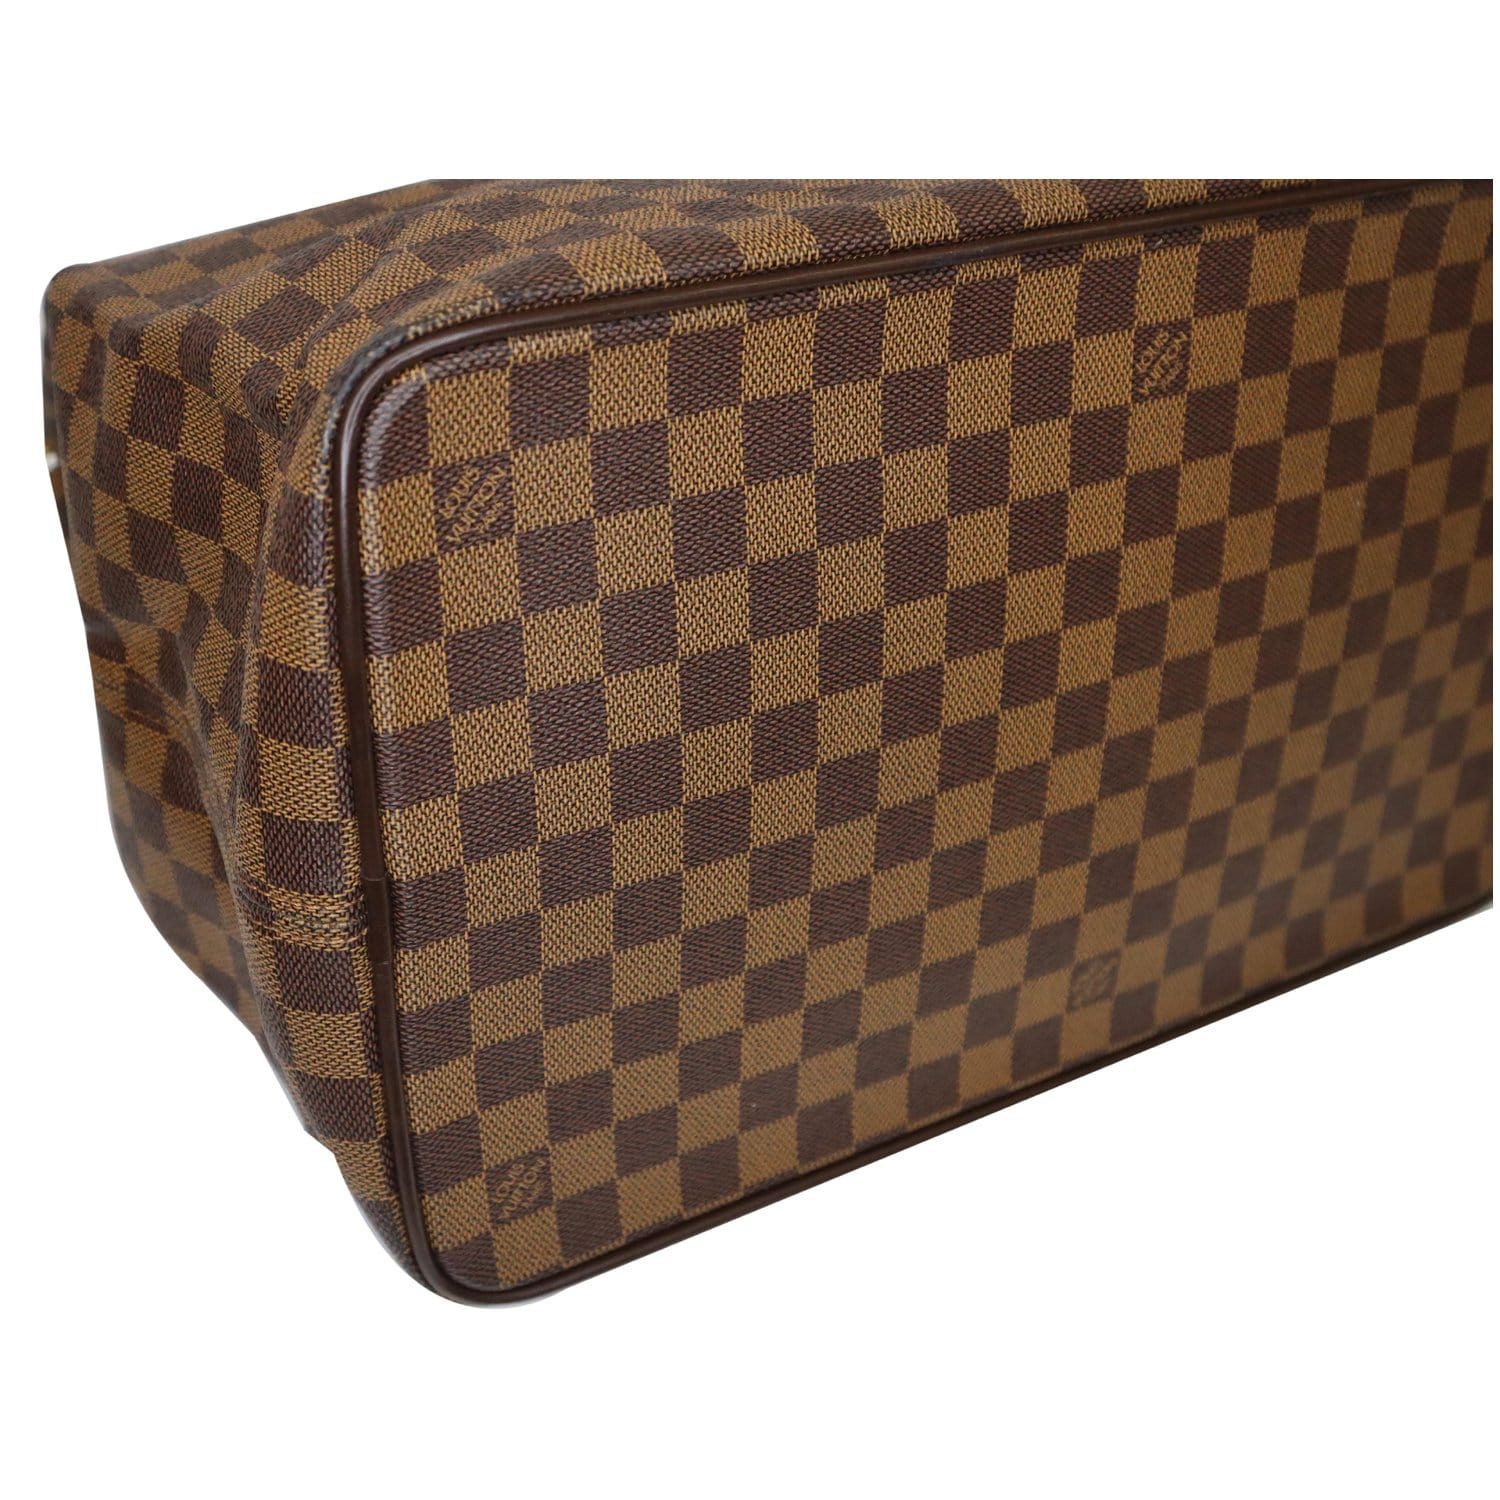 Bag Babes Boutique LLC on Instagram: ❤️LV Damier Ebene Greenwich PM.  ❤️This stylish travel tote is crafted of Louis Vuitton signature Damier  coated canvas in brown. The bag features rolled leather top